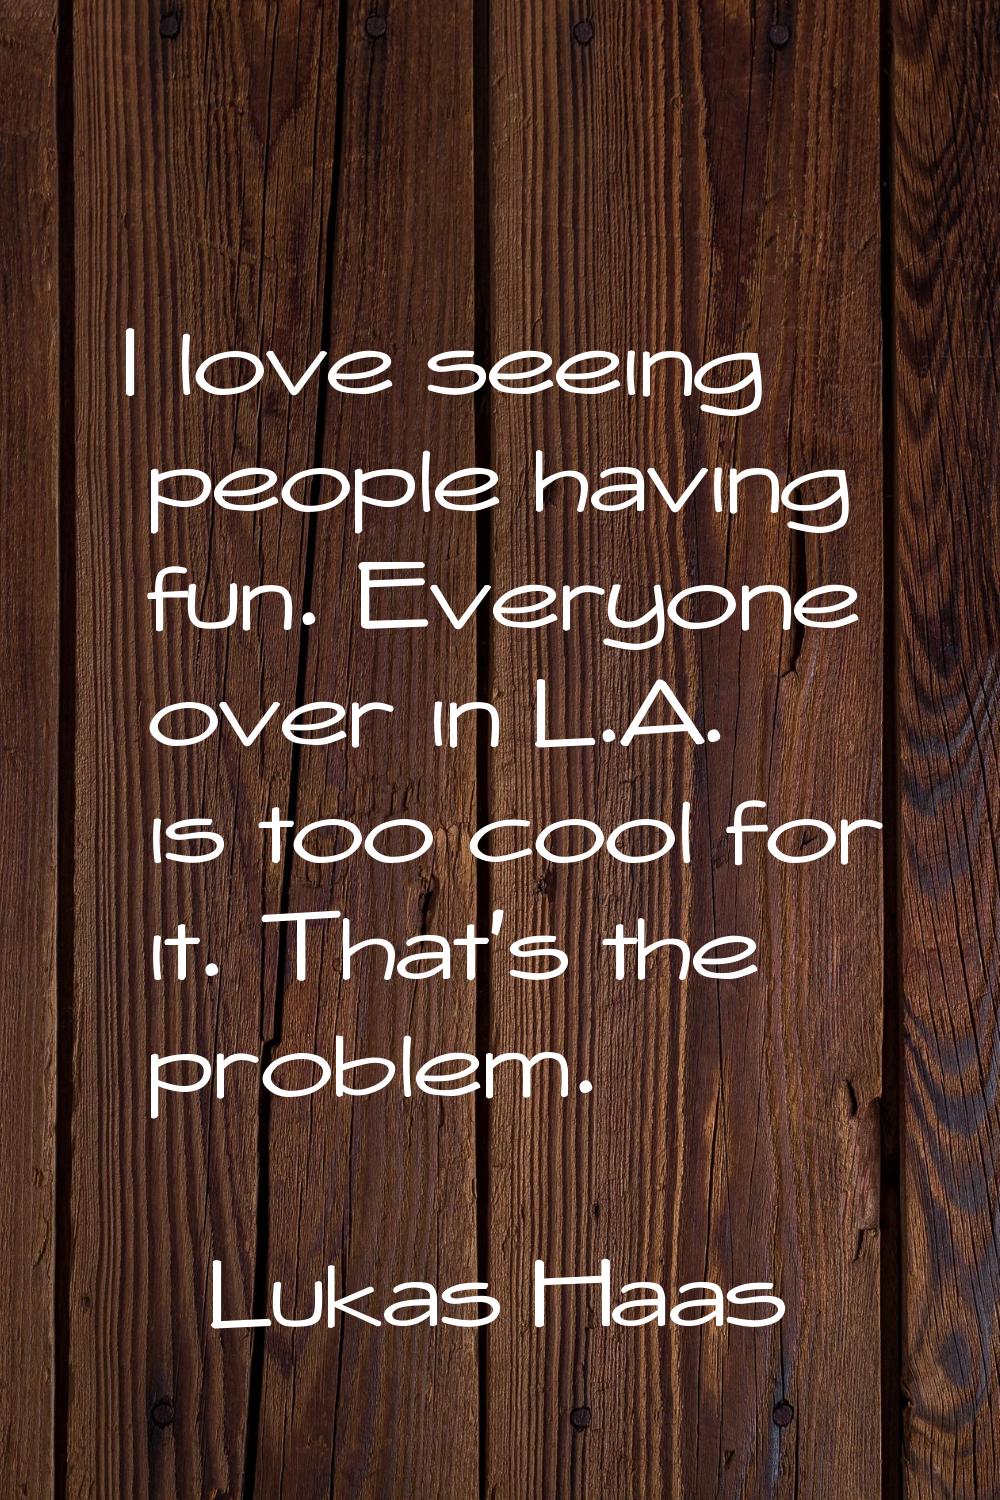 I love seeing people having fun. Everyone over in L.A. is too cool for it. That's the problem.